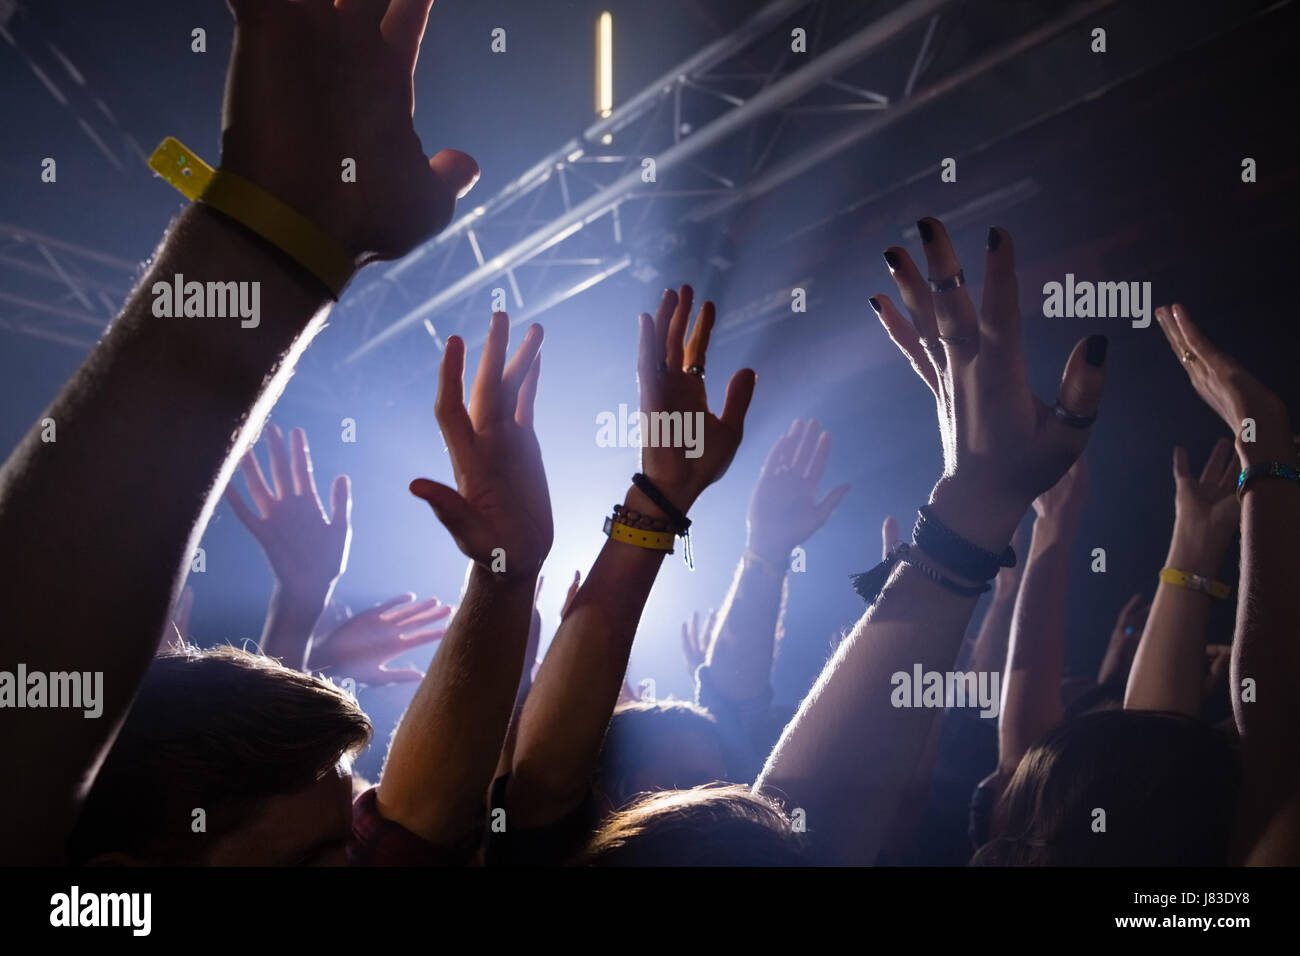 Group of people dancing at a concert in nightclub Stock Photo